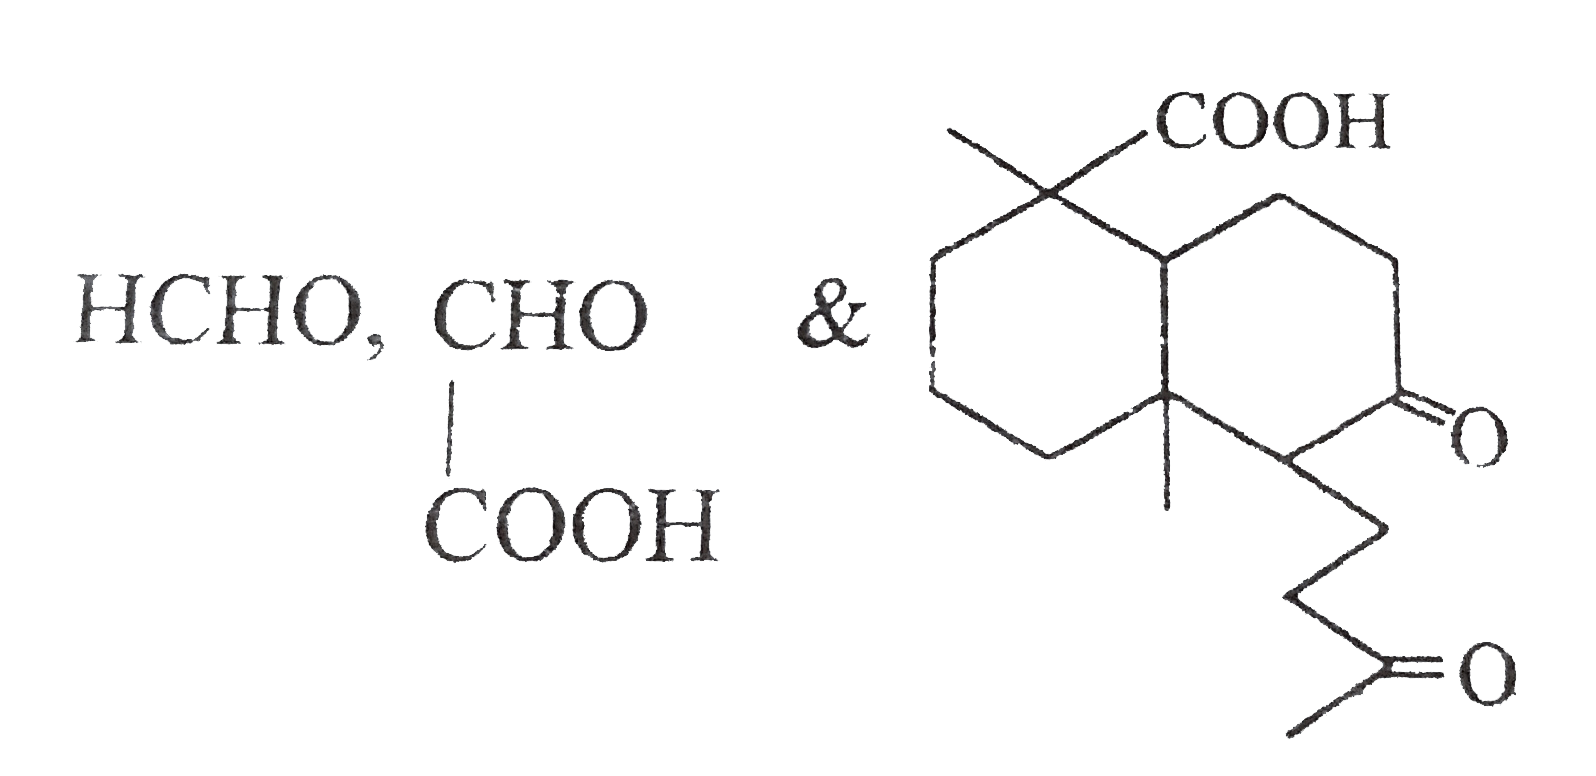 Ozonolysis of a compound Agathene dicarboxylic acid gives following compounds:   On complete reduction by Na-EtOH. Agathene dicarboxylic acid give hydrocarbon C(20)H(38) which have 5 chiral carbon it.   Q. Total stereoisomers possible for agathene dicarboxylic acid are: